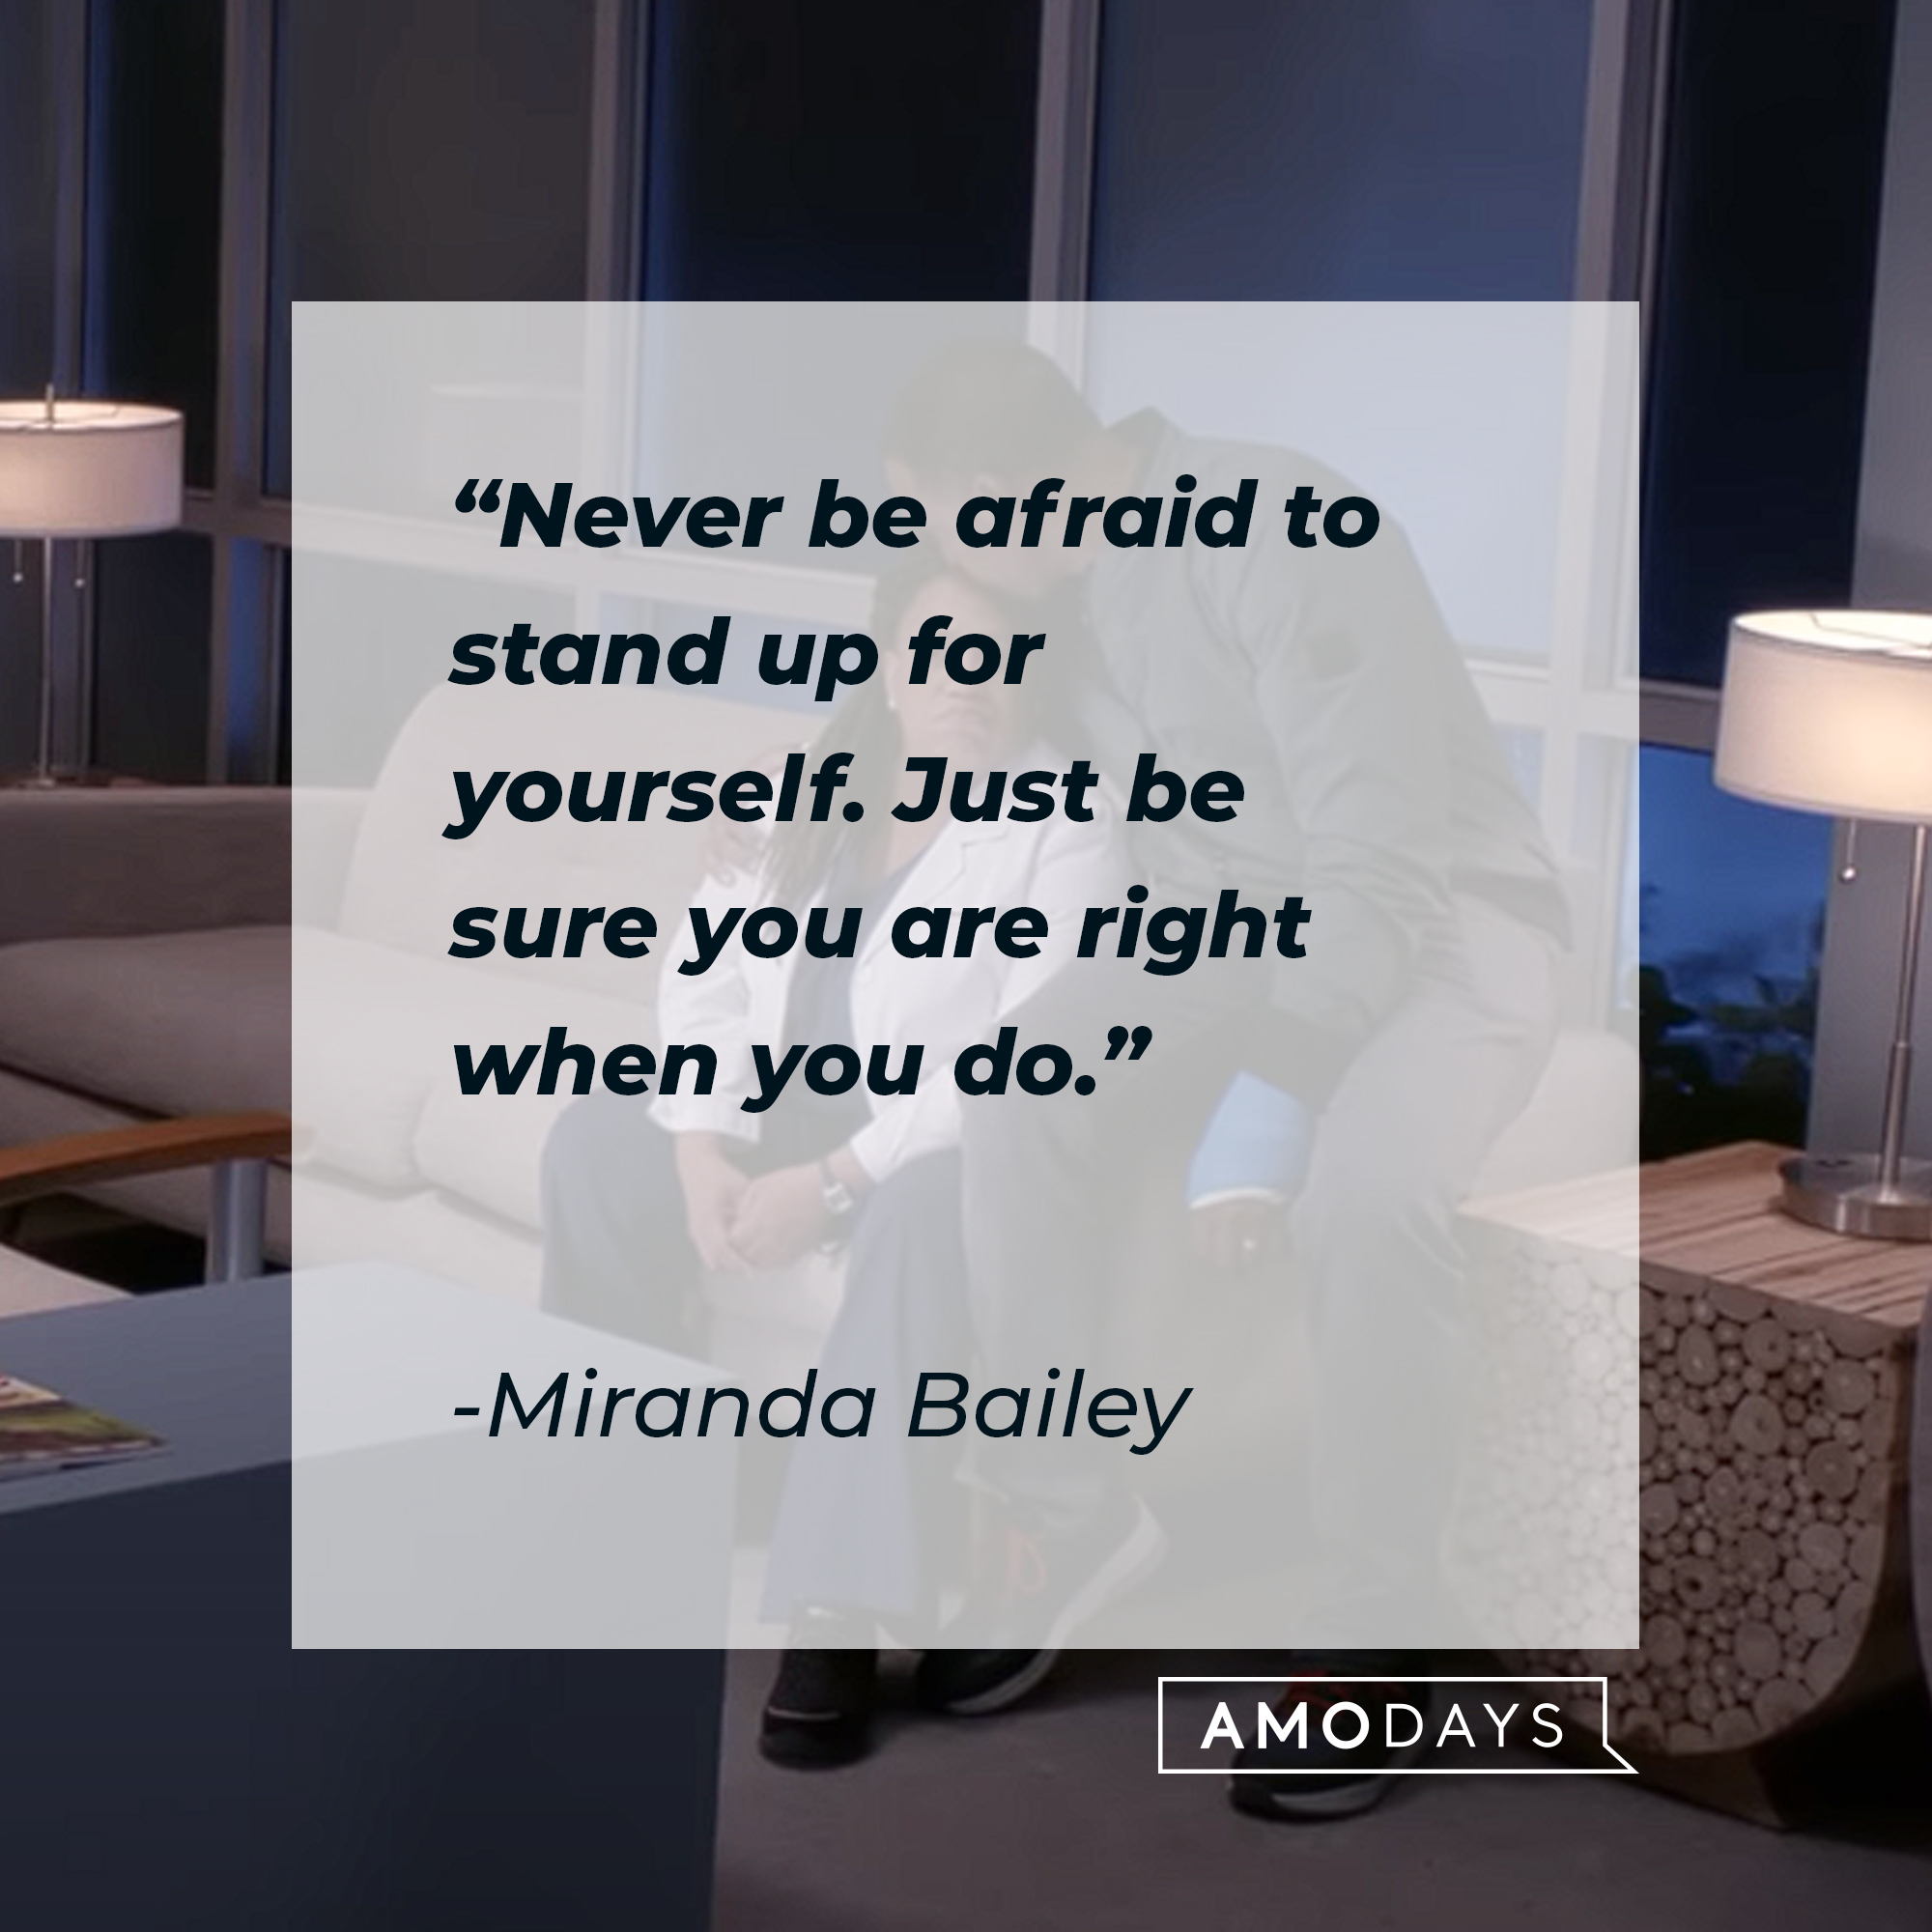 Miranda Bailey's quote: "Never be afraid to stand up for yourself. Just be sure you are right when you do." — Miranda Bailey | Source: youtube.com/ABCNetwork